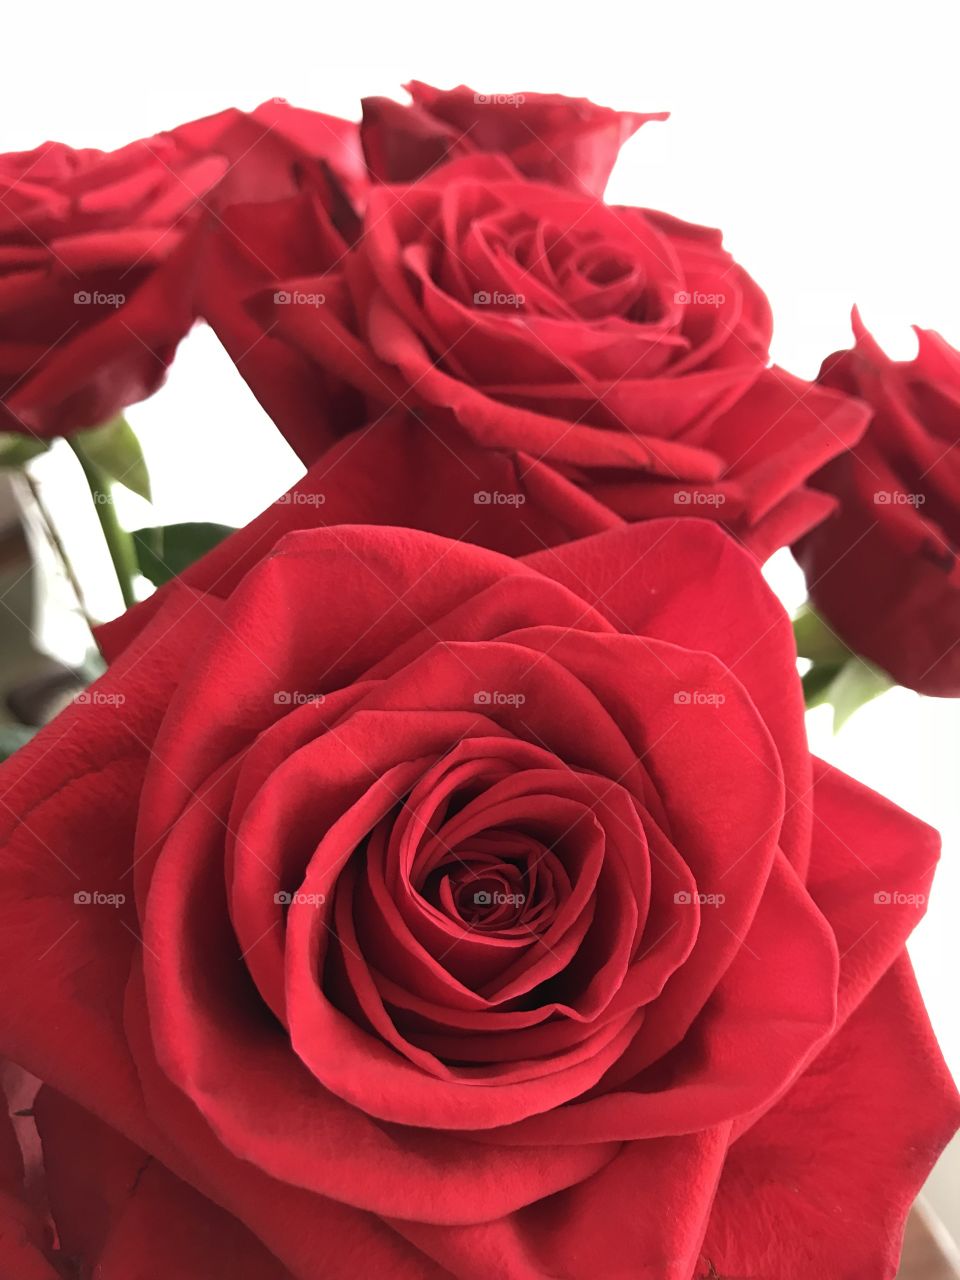 Red roses on white background 